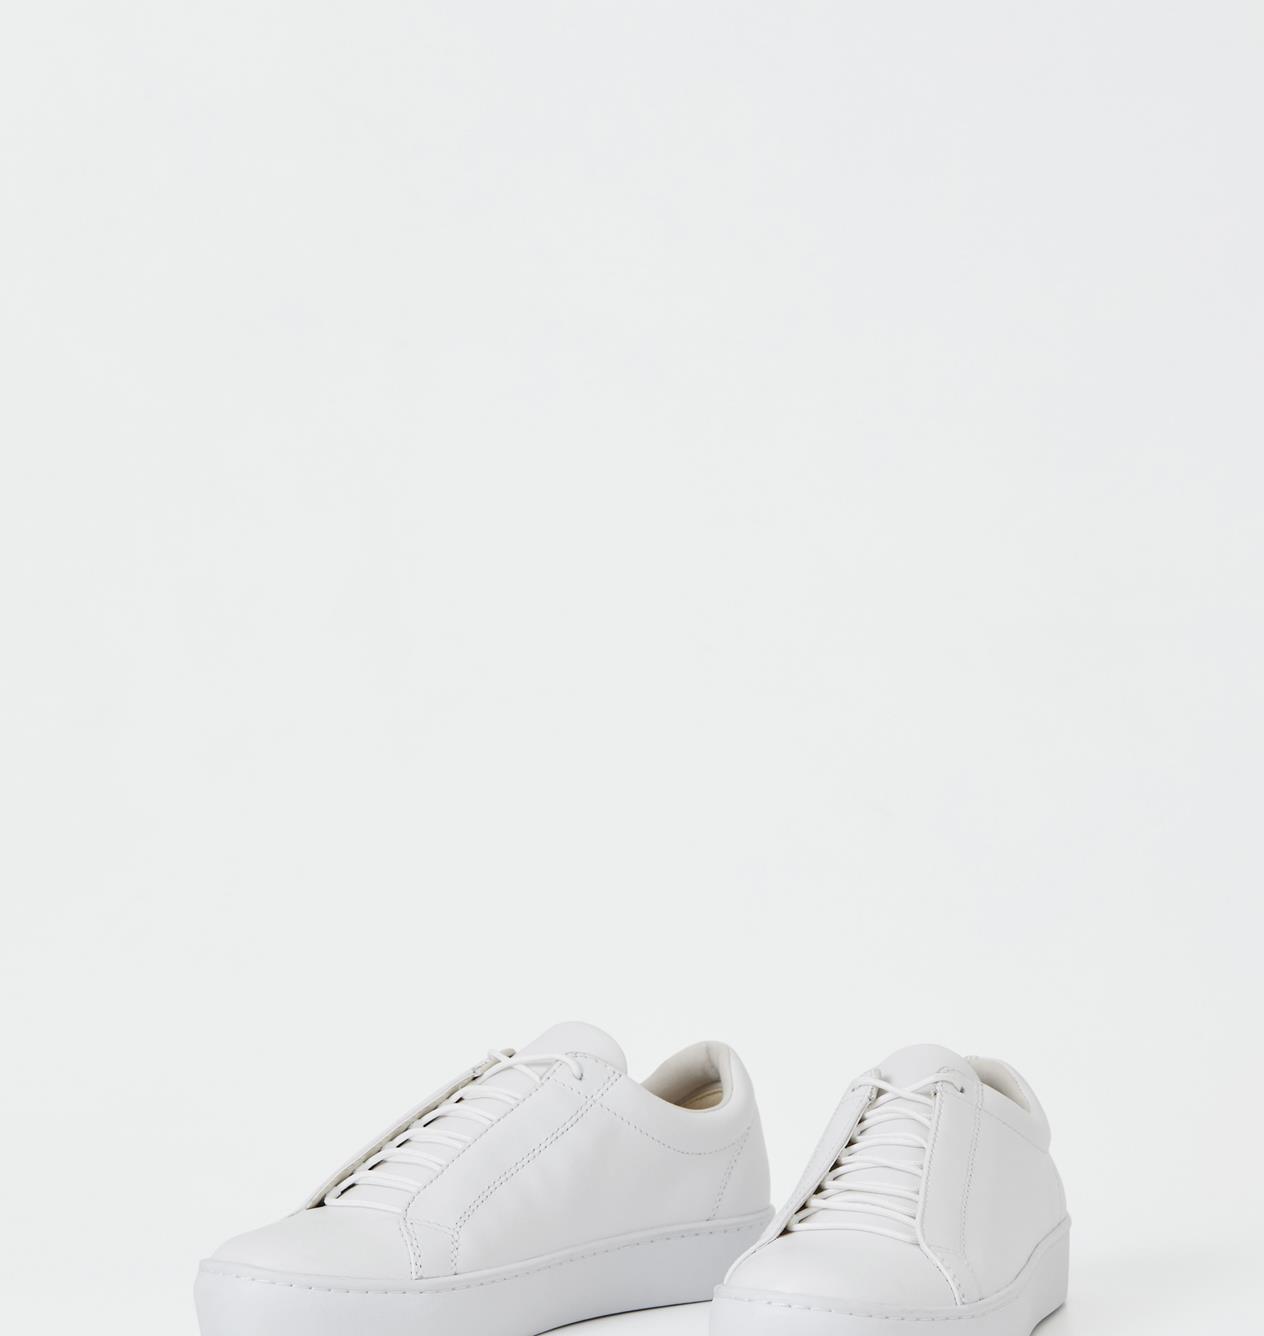 procent fragment Goed opgeleid Zoe - White Sneakers Woman | Vagabond